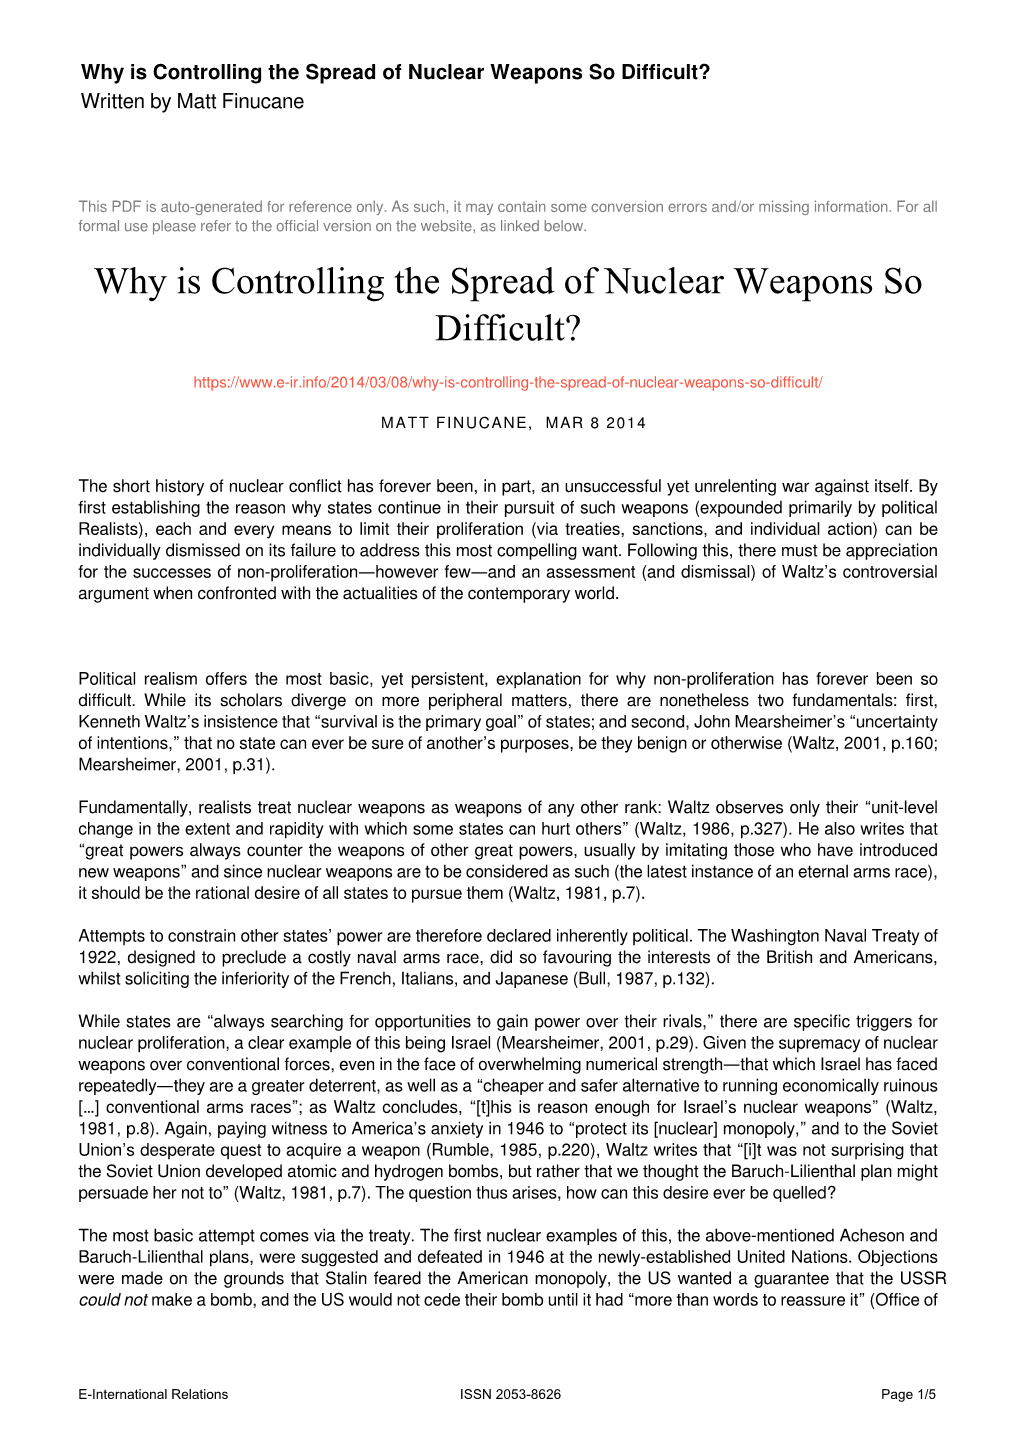 Why Is Controlling the Spread of Nuclear Weapons So Difficult? Written by Matt Finucane